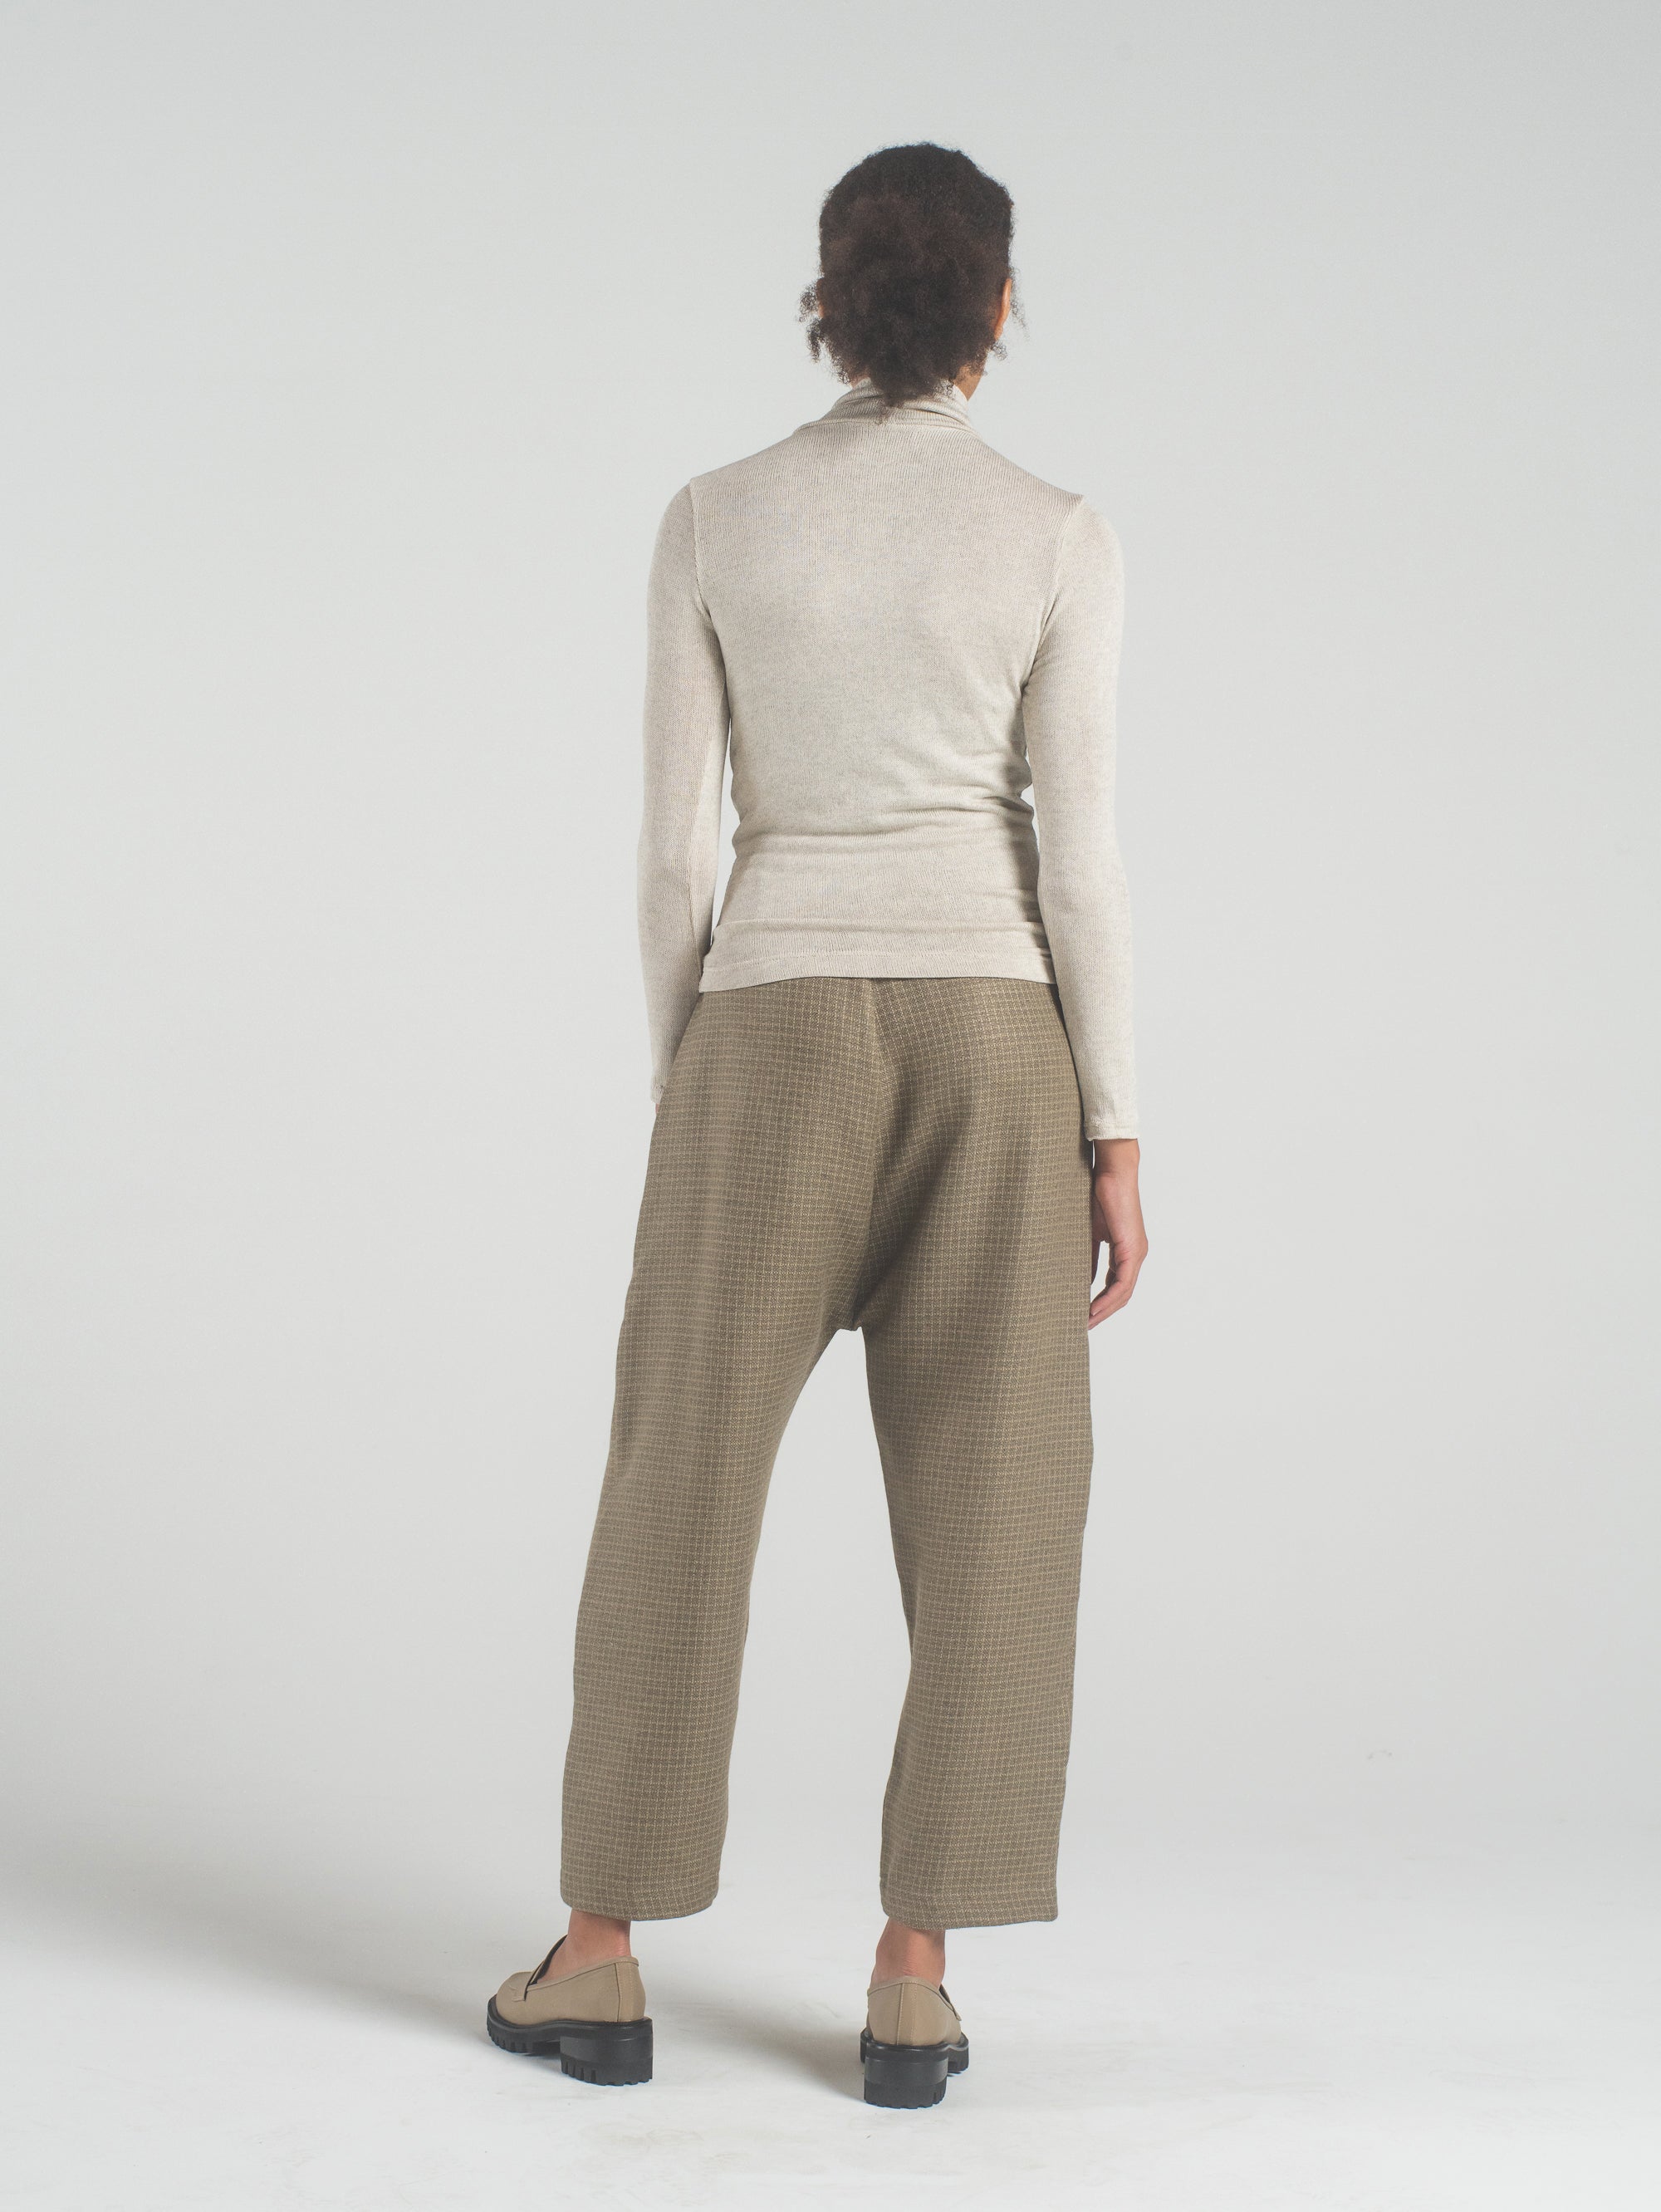 SAMPLE SALE - Delfina Turtleneck in Oyster Knit - SMALL